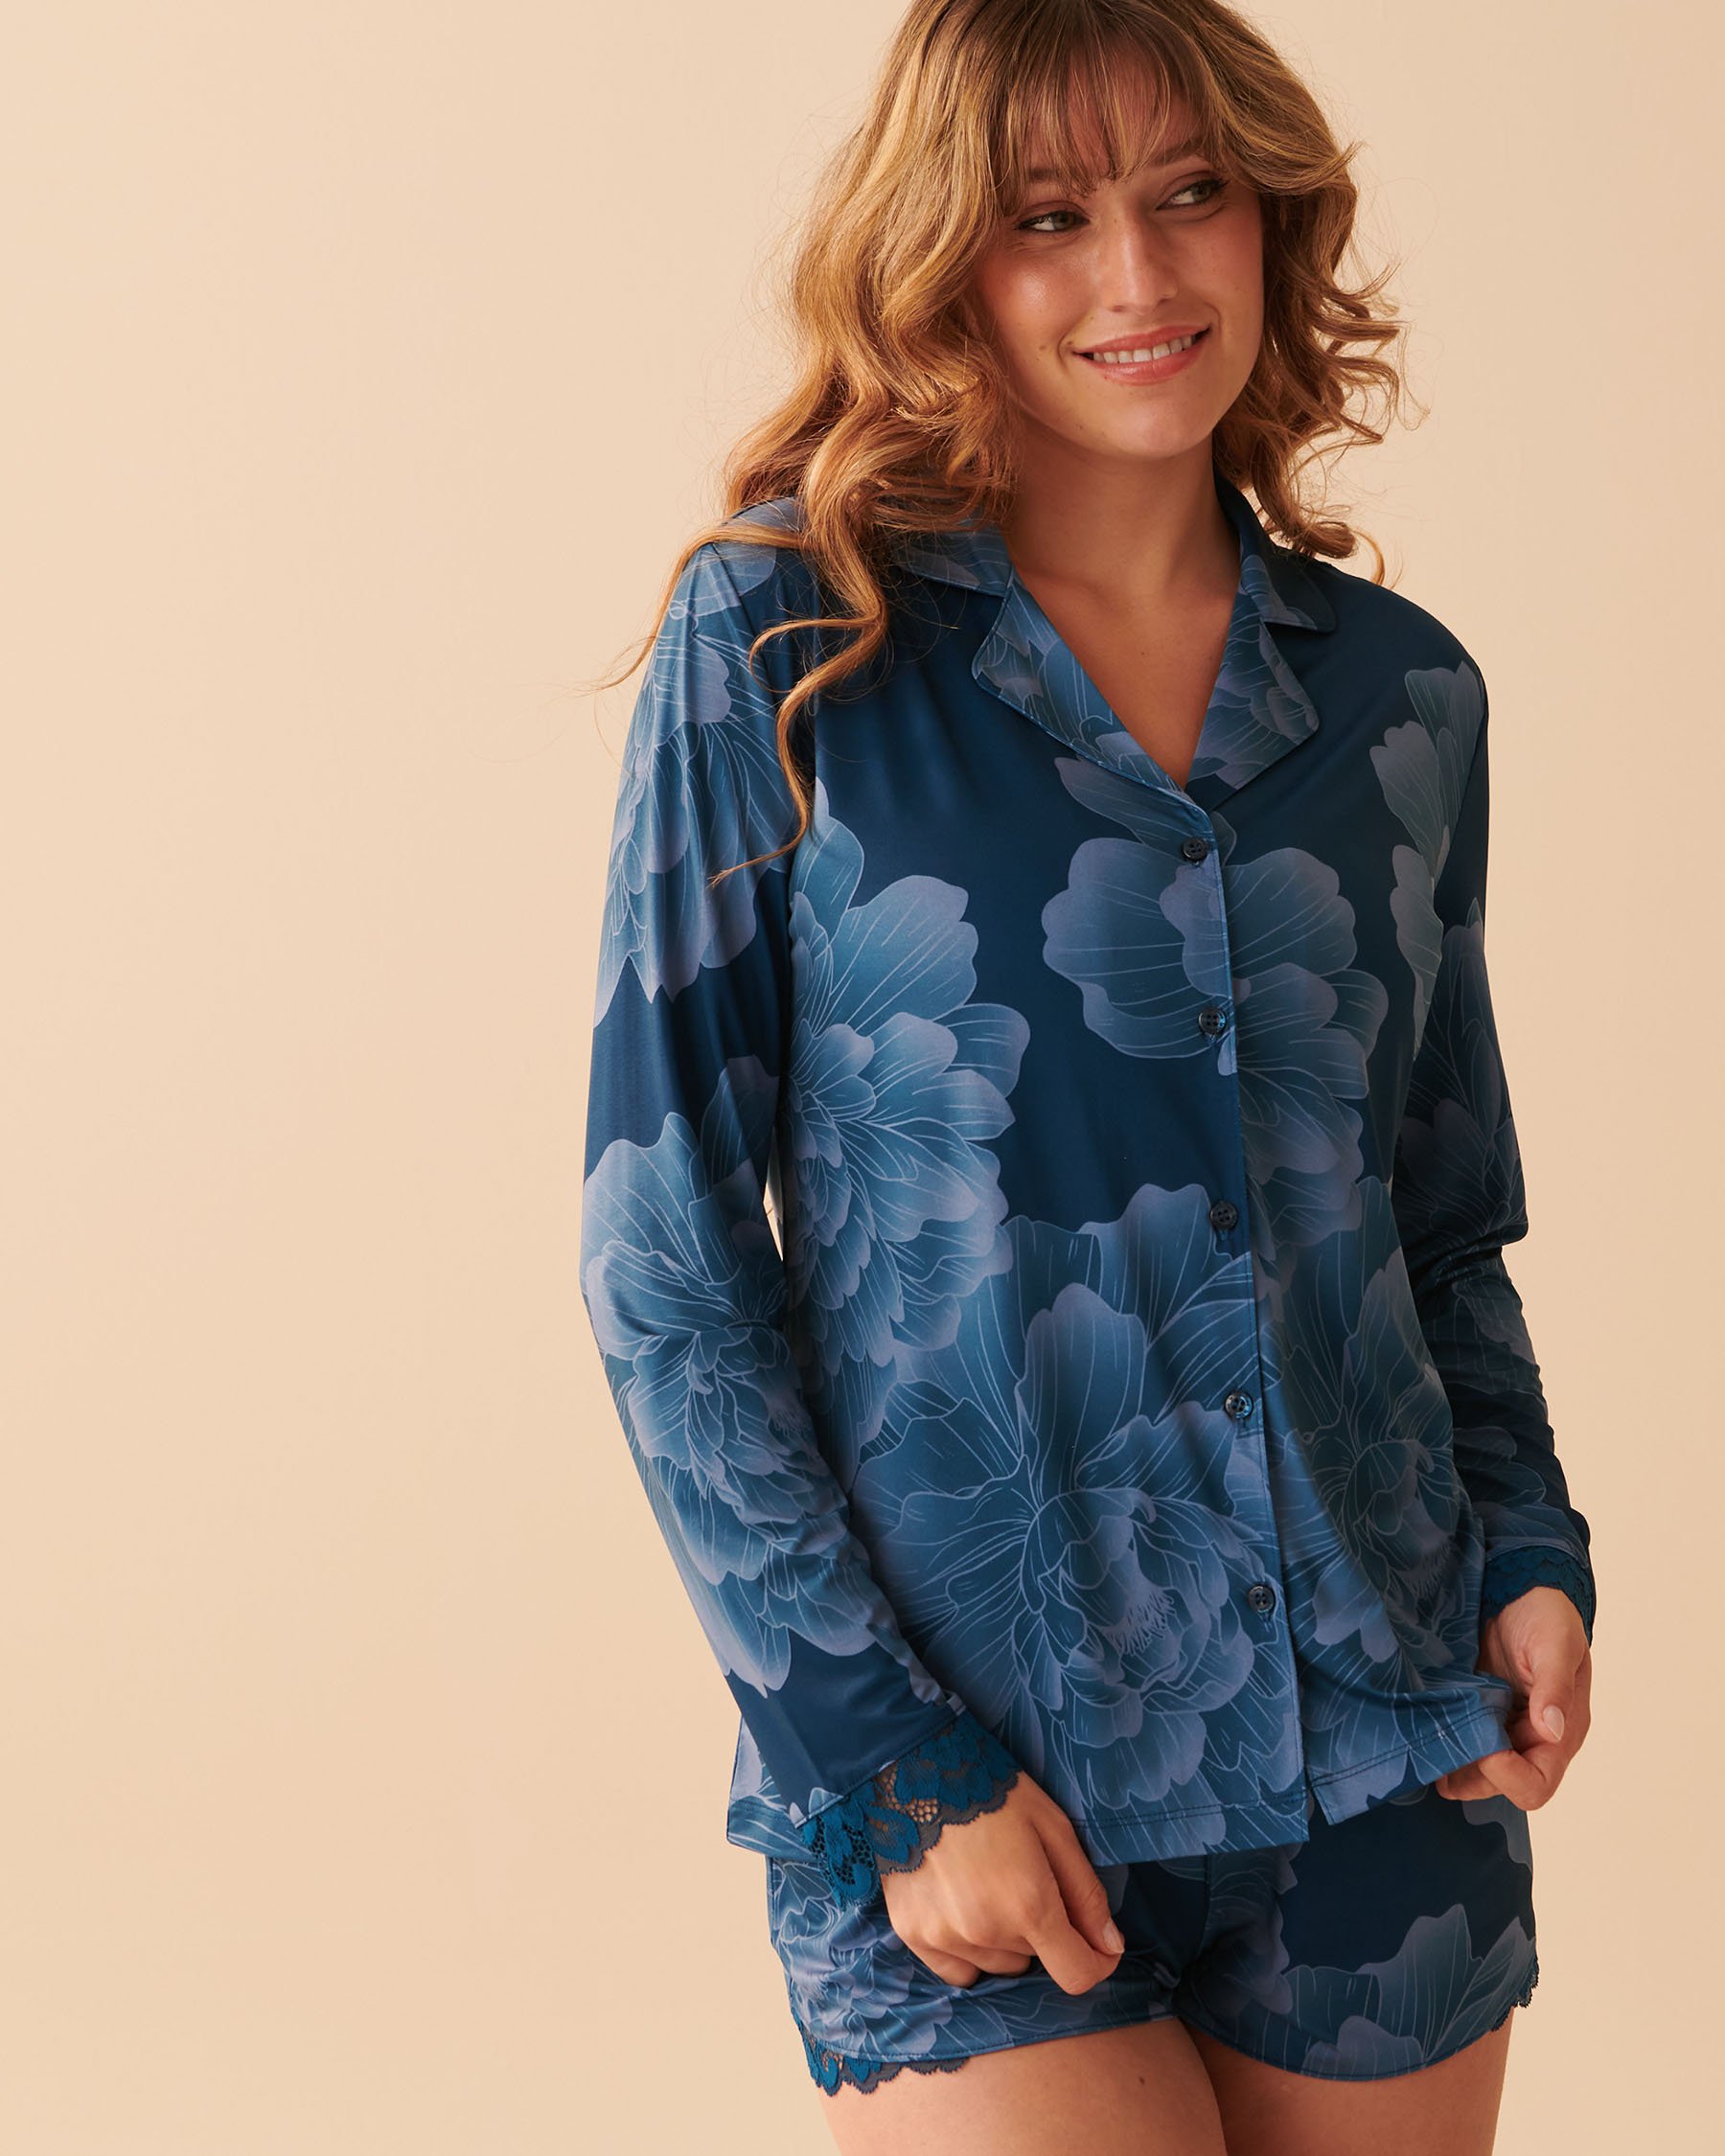 LA VIE EN ROSE Recycled Fibers Lace Trim Button-down Shirt Midnight peony 60100080 - View4